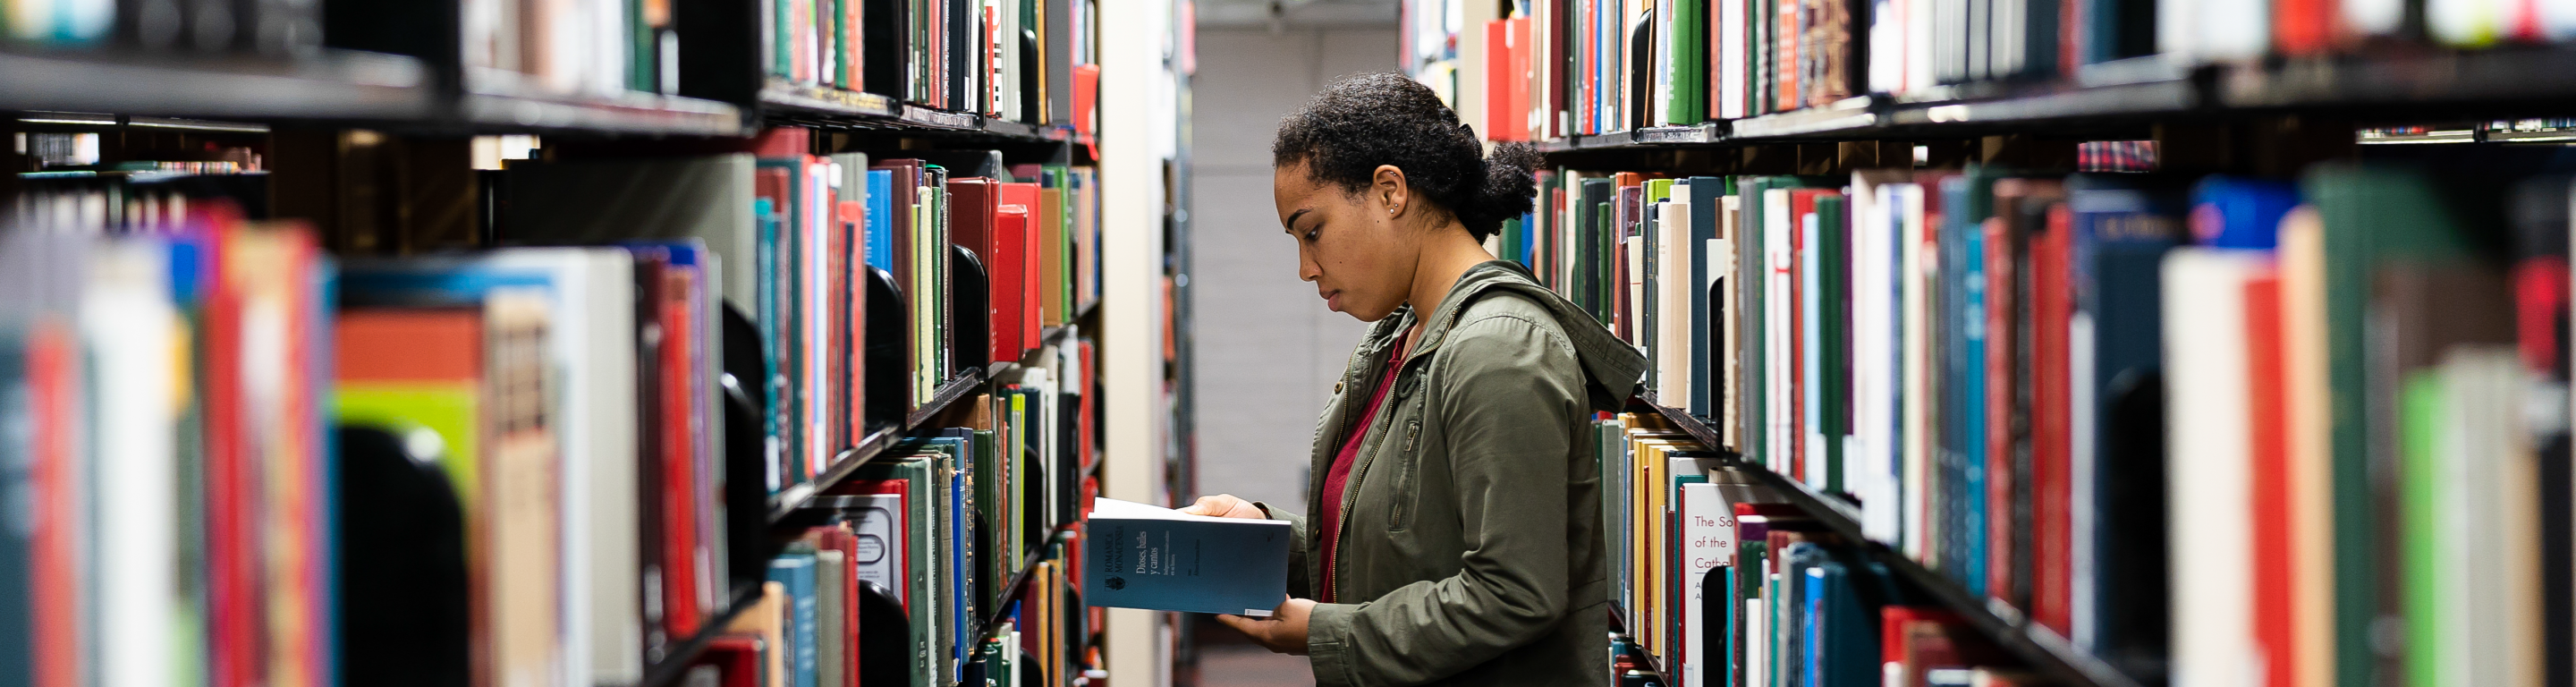 student looking at books in the library stacks